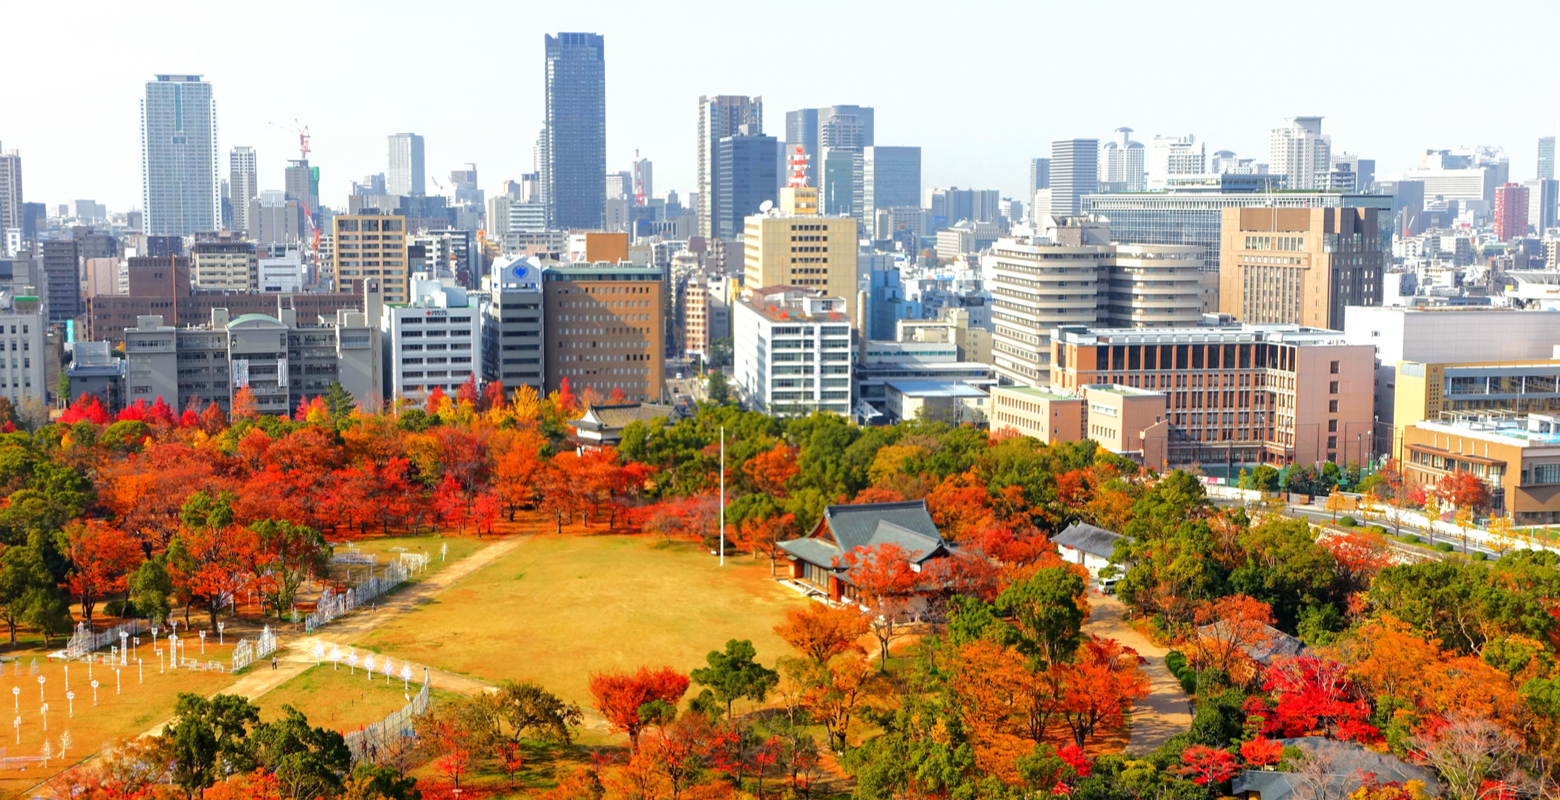 For a piece on where to stay in Montreal, a beautiful Osaka castle park in autumn shown via aerial shot